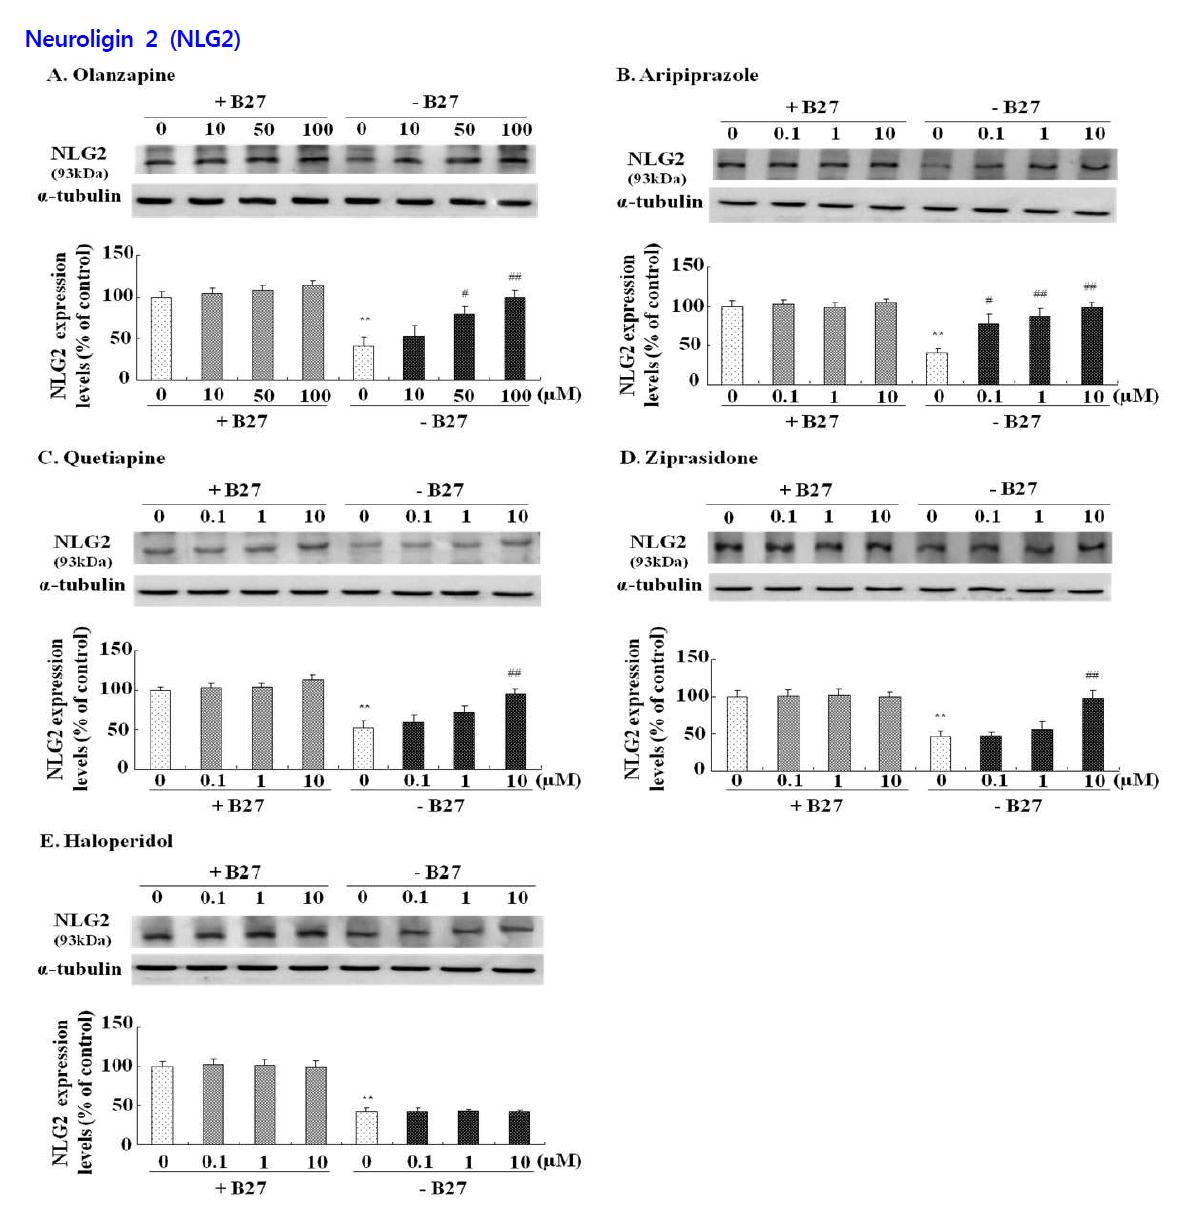 Effects of antipsychotic drugs on the expression of neuroligin 2 (NLG2) in hippocampal neurons.